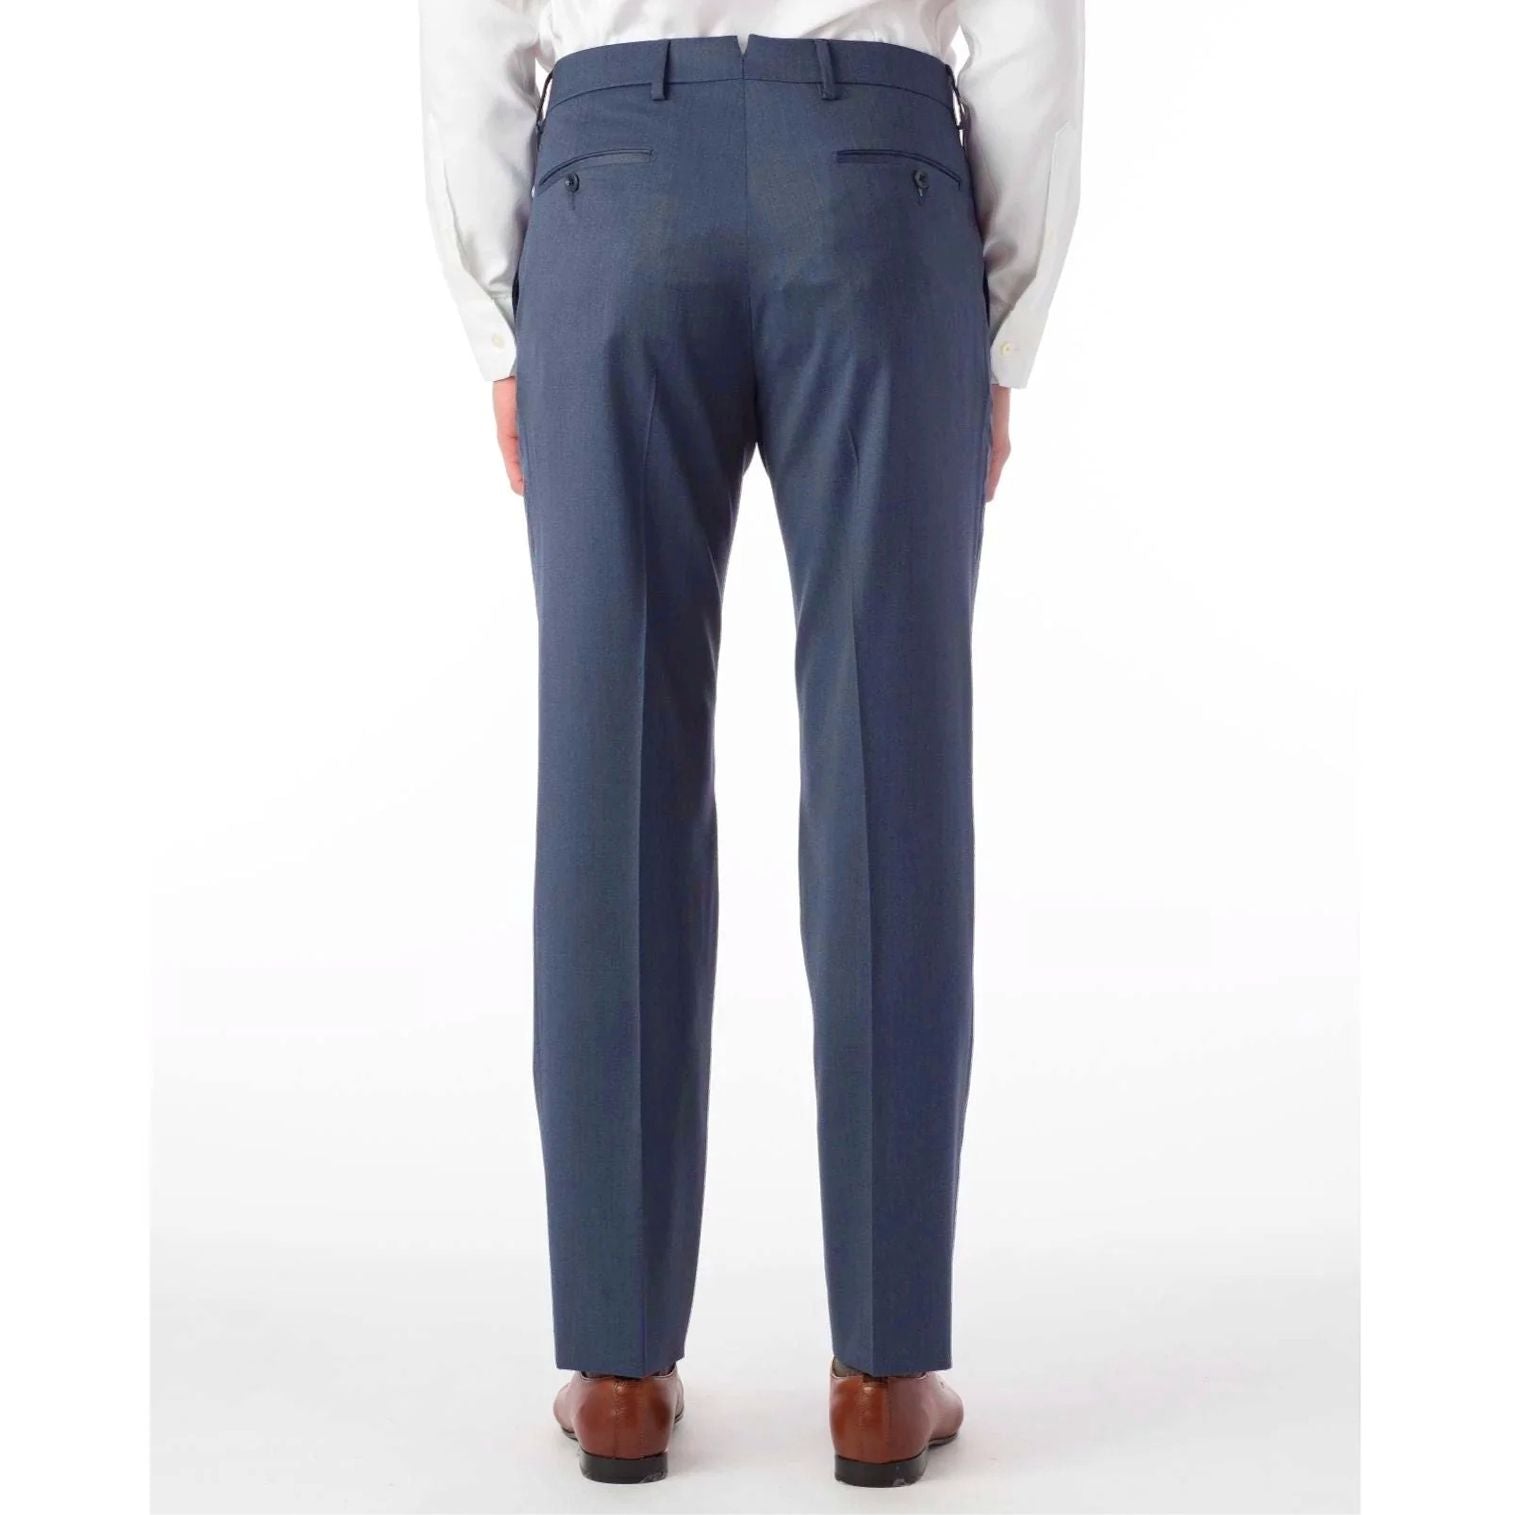 Super 130s Italian Luxury Ultimate Comfort Wool Tropical Flat Front Trouser in Blue Mix by 6 East by Ballin